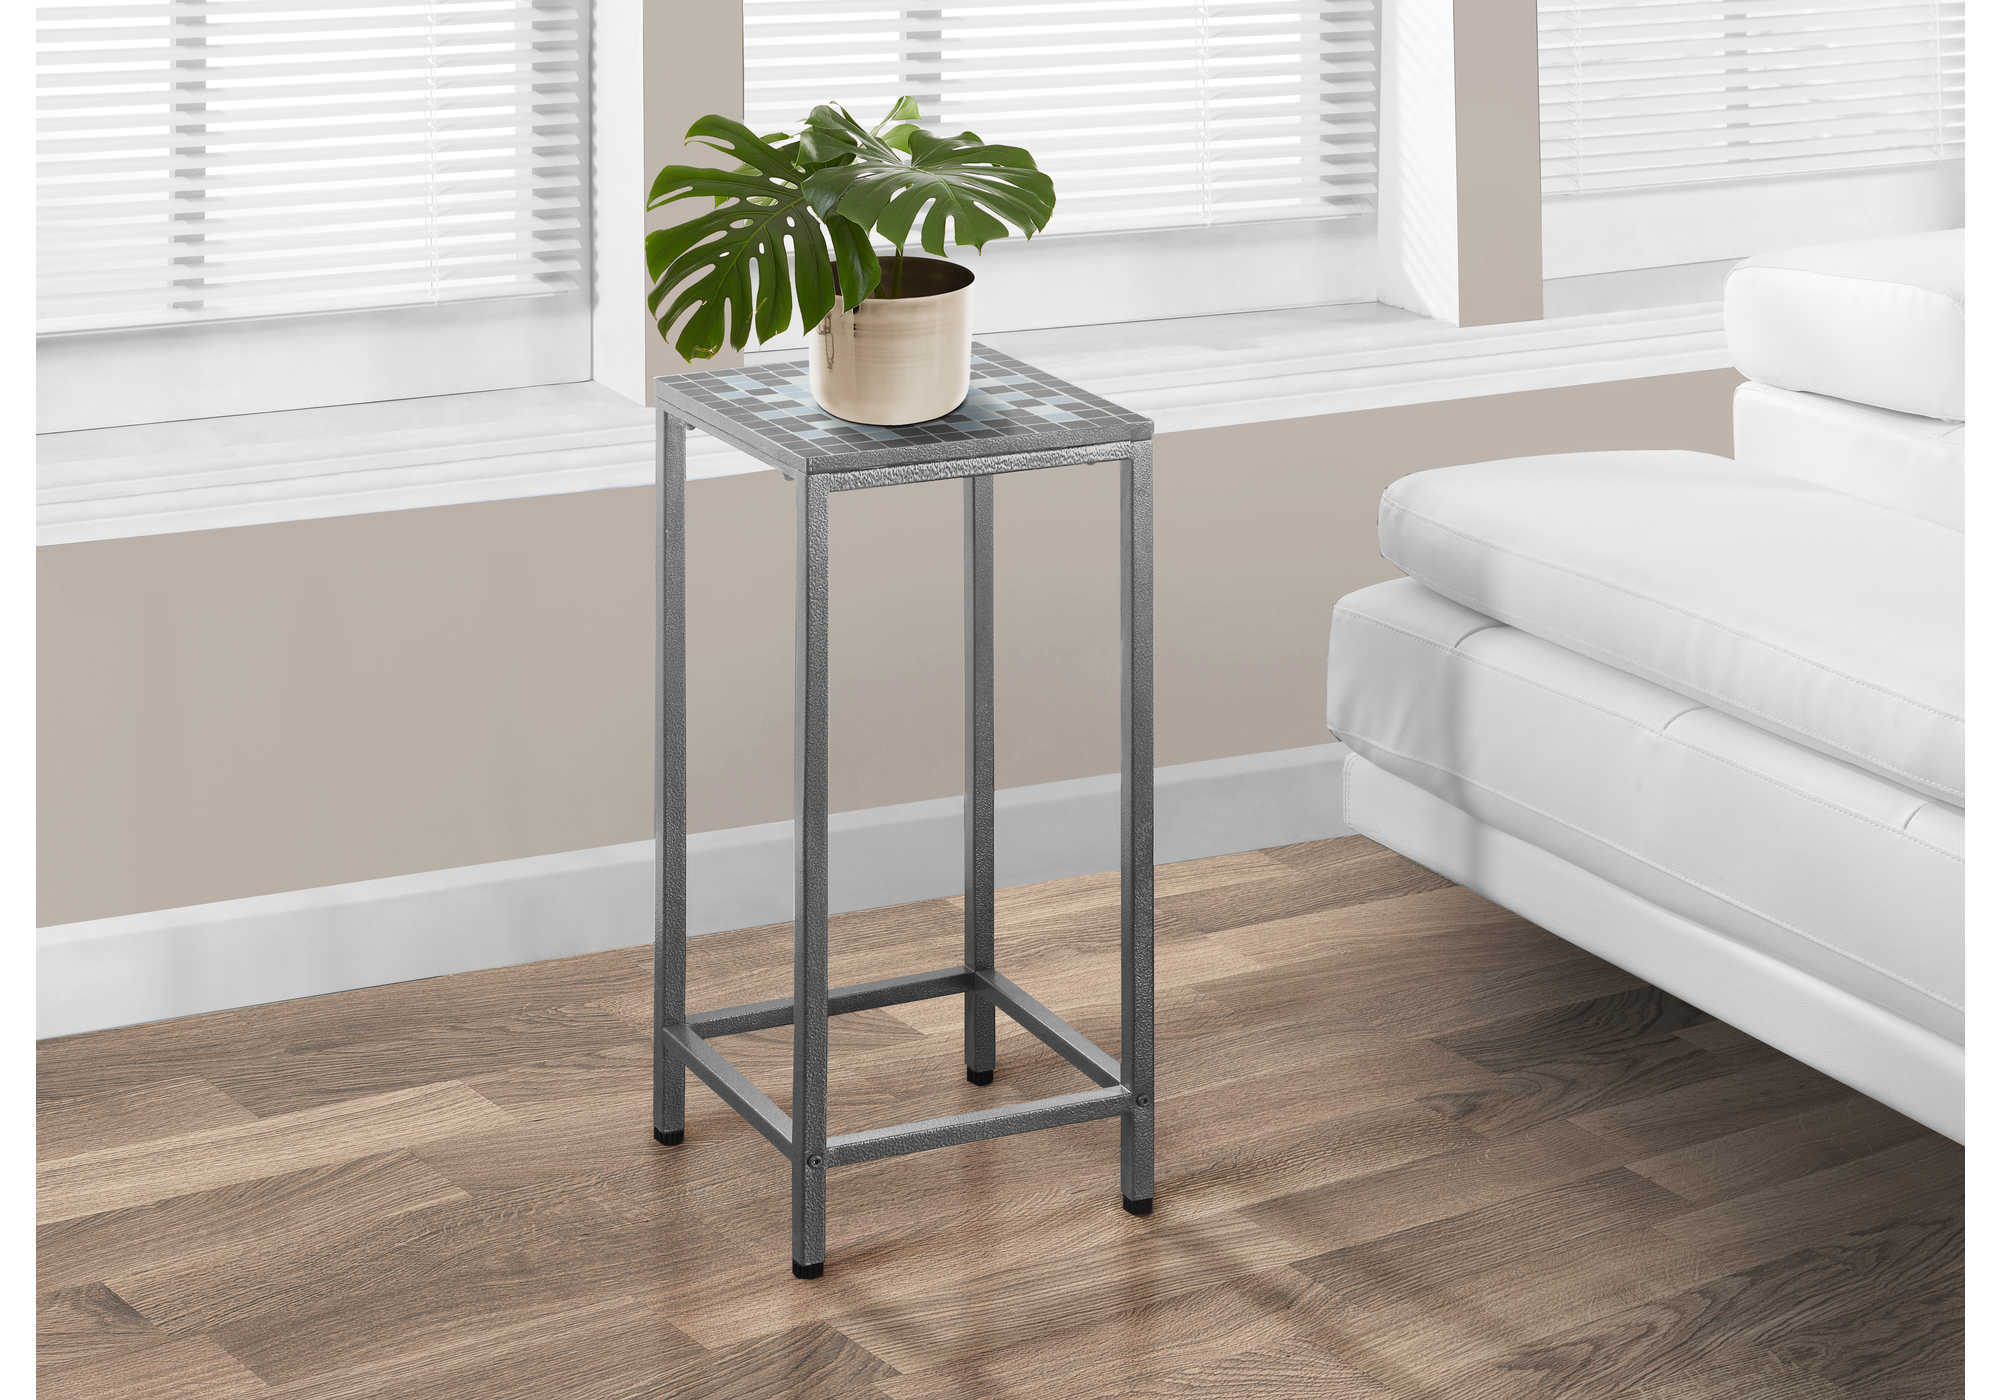 ACCENT TABLE - GREY / BLUE TILE TOP / HAMMERED SILVER